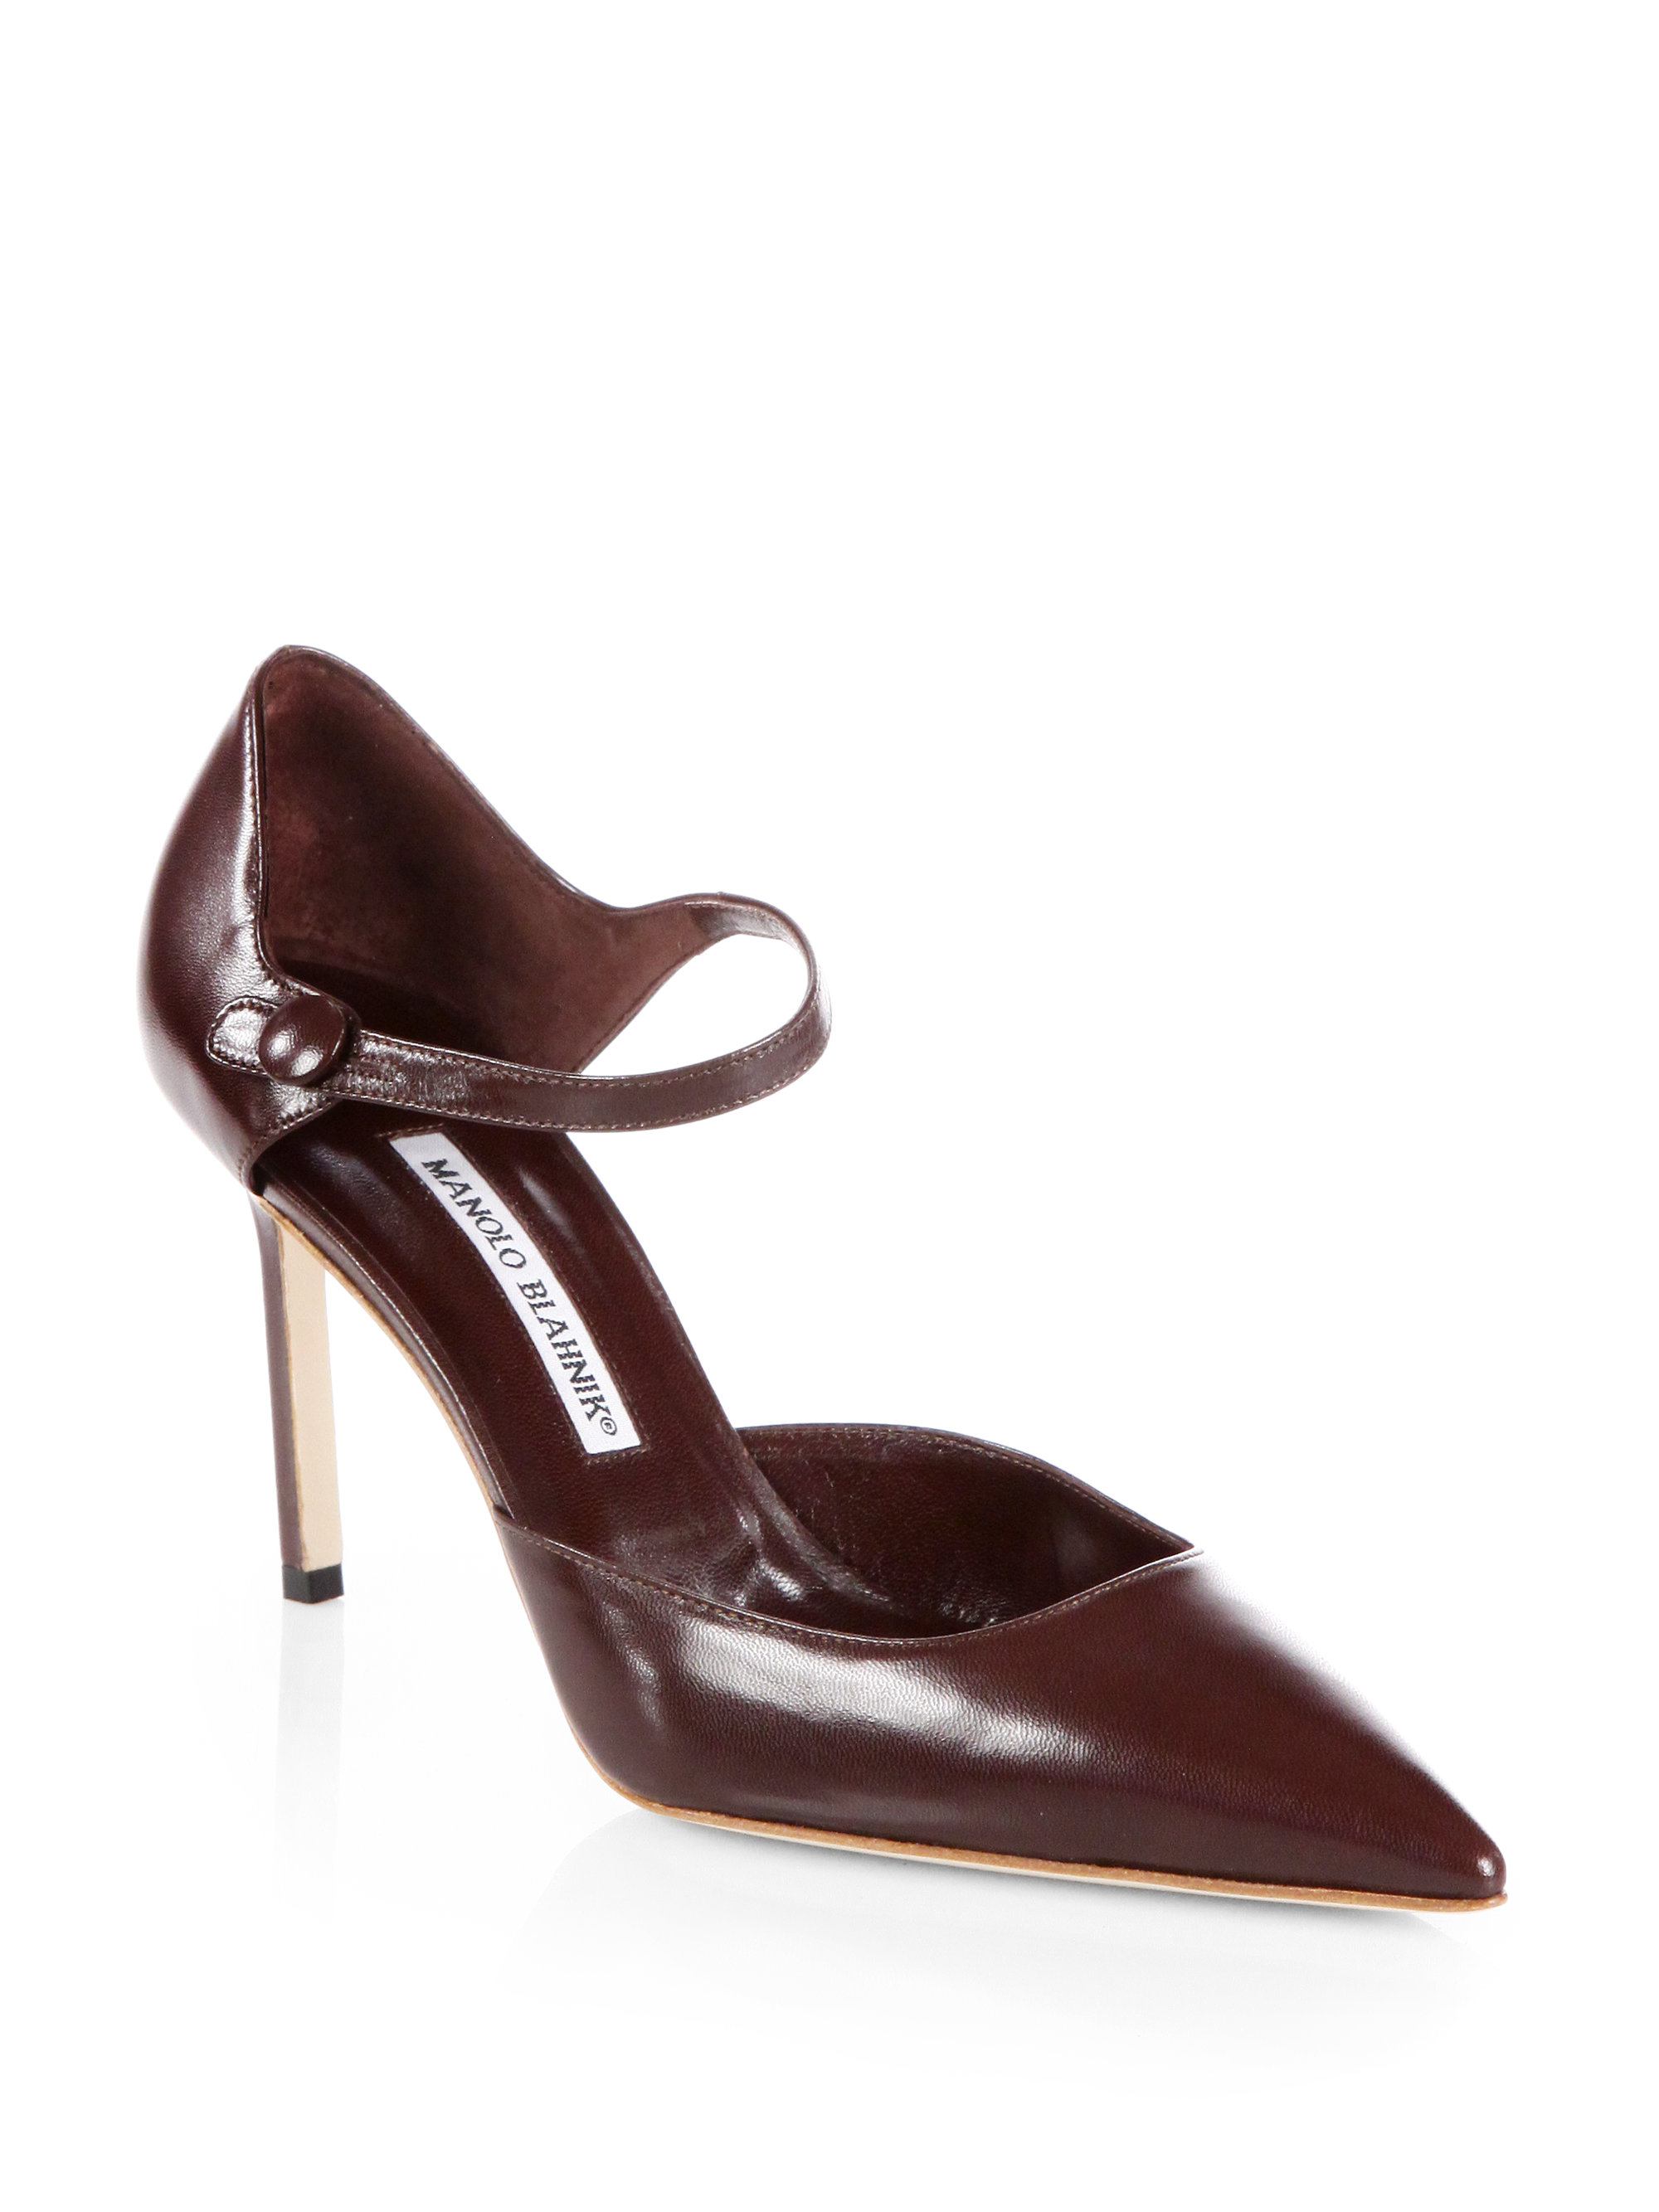 Manolo Blahnik Norvany Leather Mary Jane Pumps in Brown - Lyst